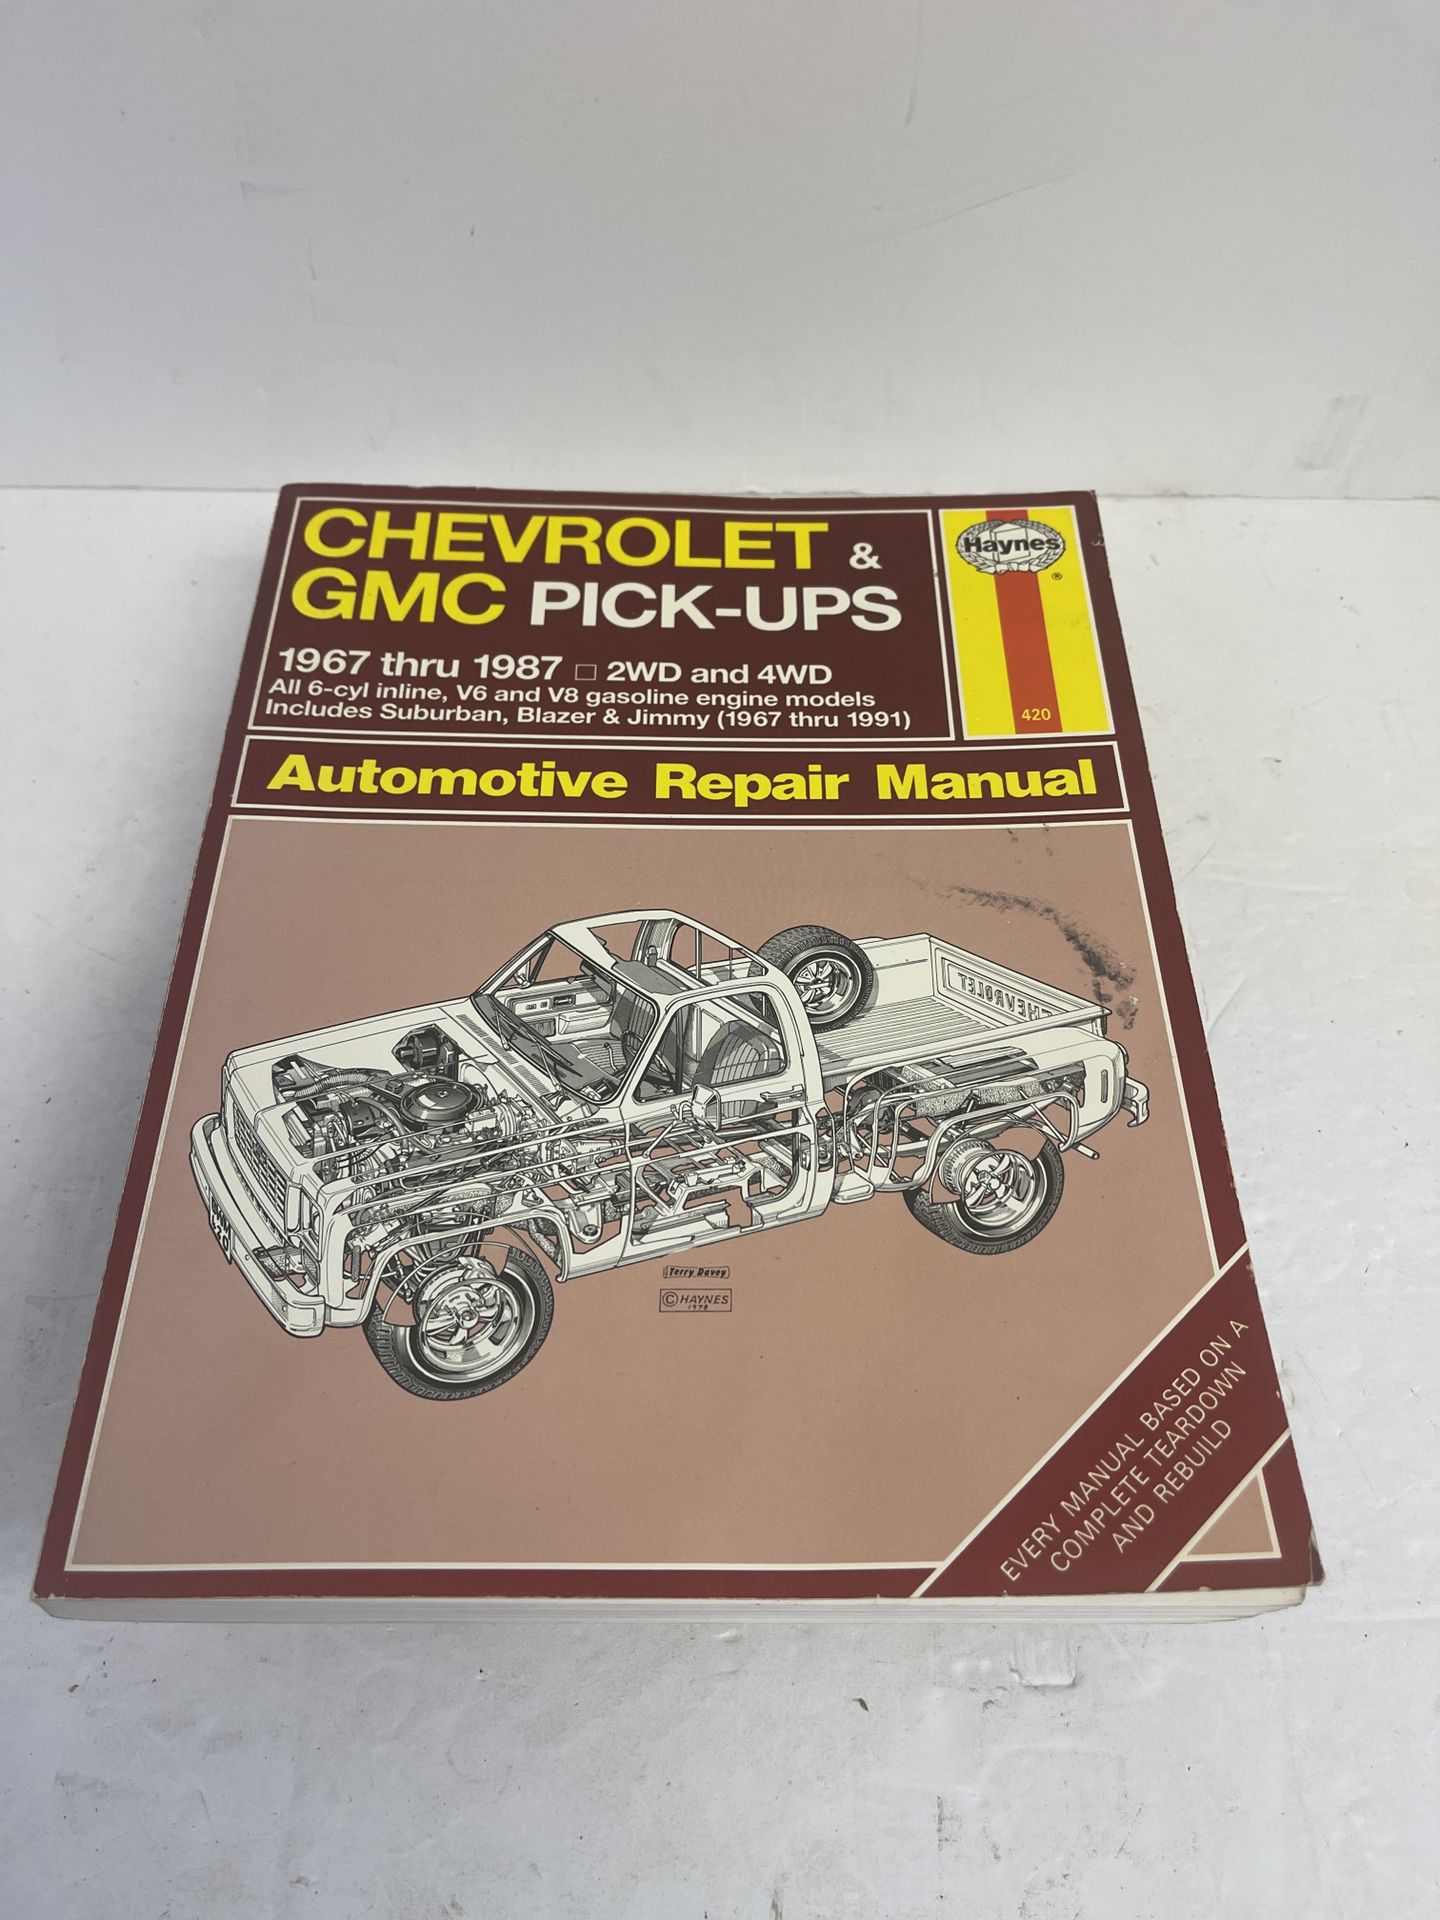 Haynes Chevy & GMC Repair Manual Pickup Truck 1 & SUVs 67-1991 - W800  Great condition.   We try to package and ship items within 24 hours.  A